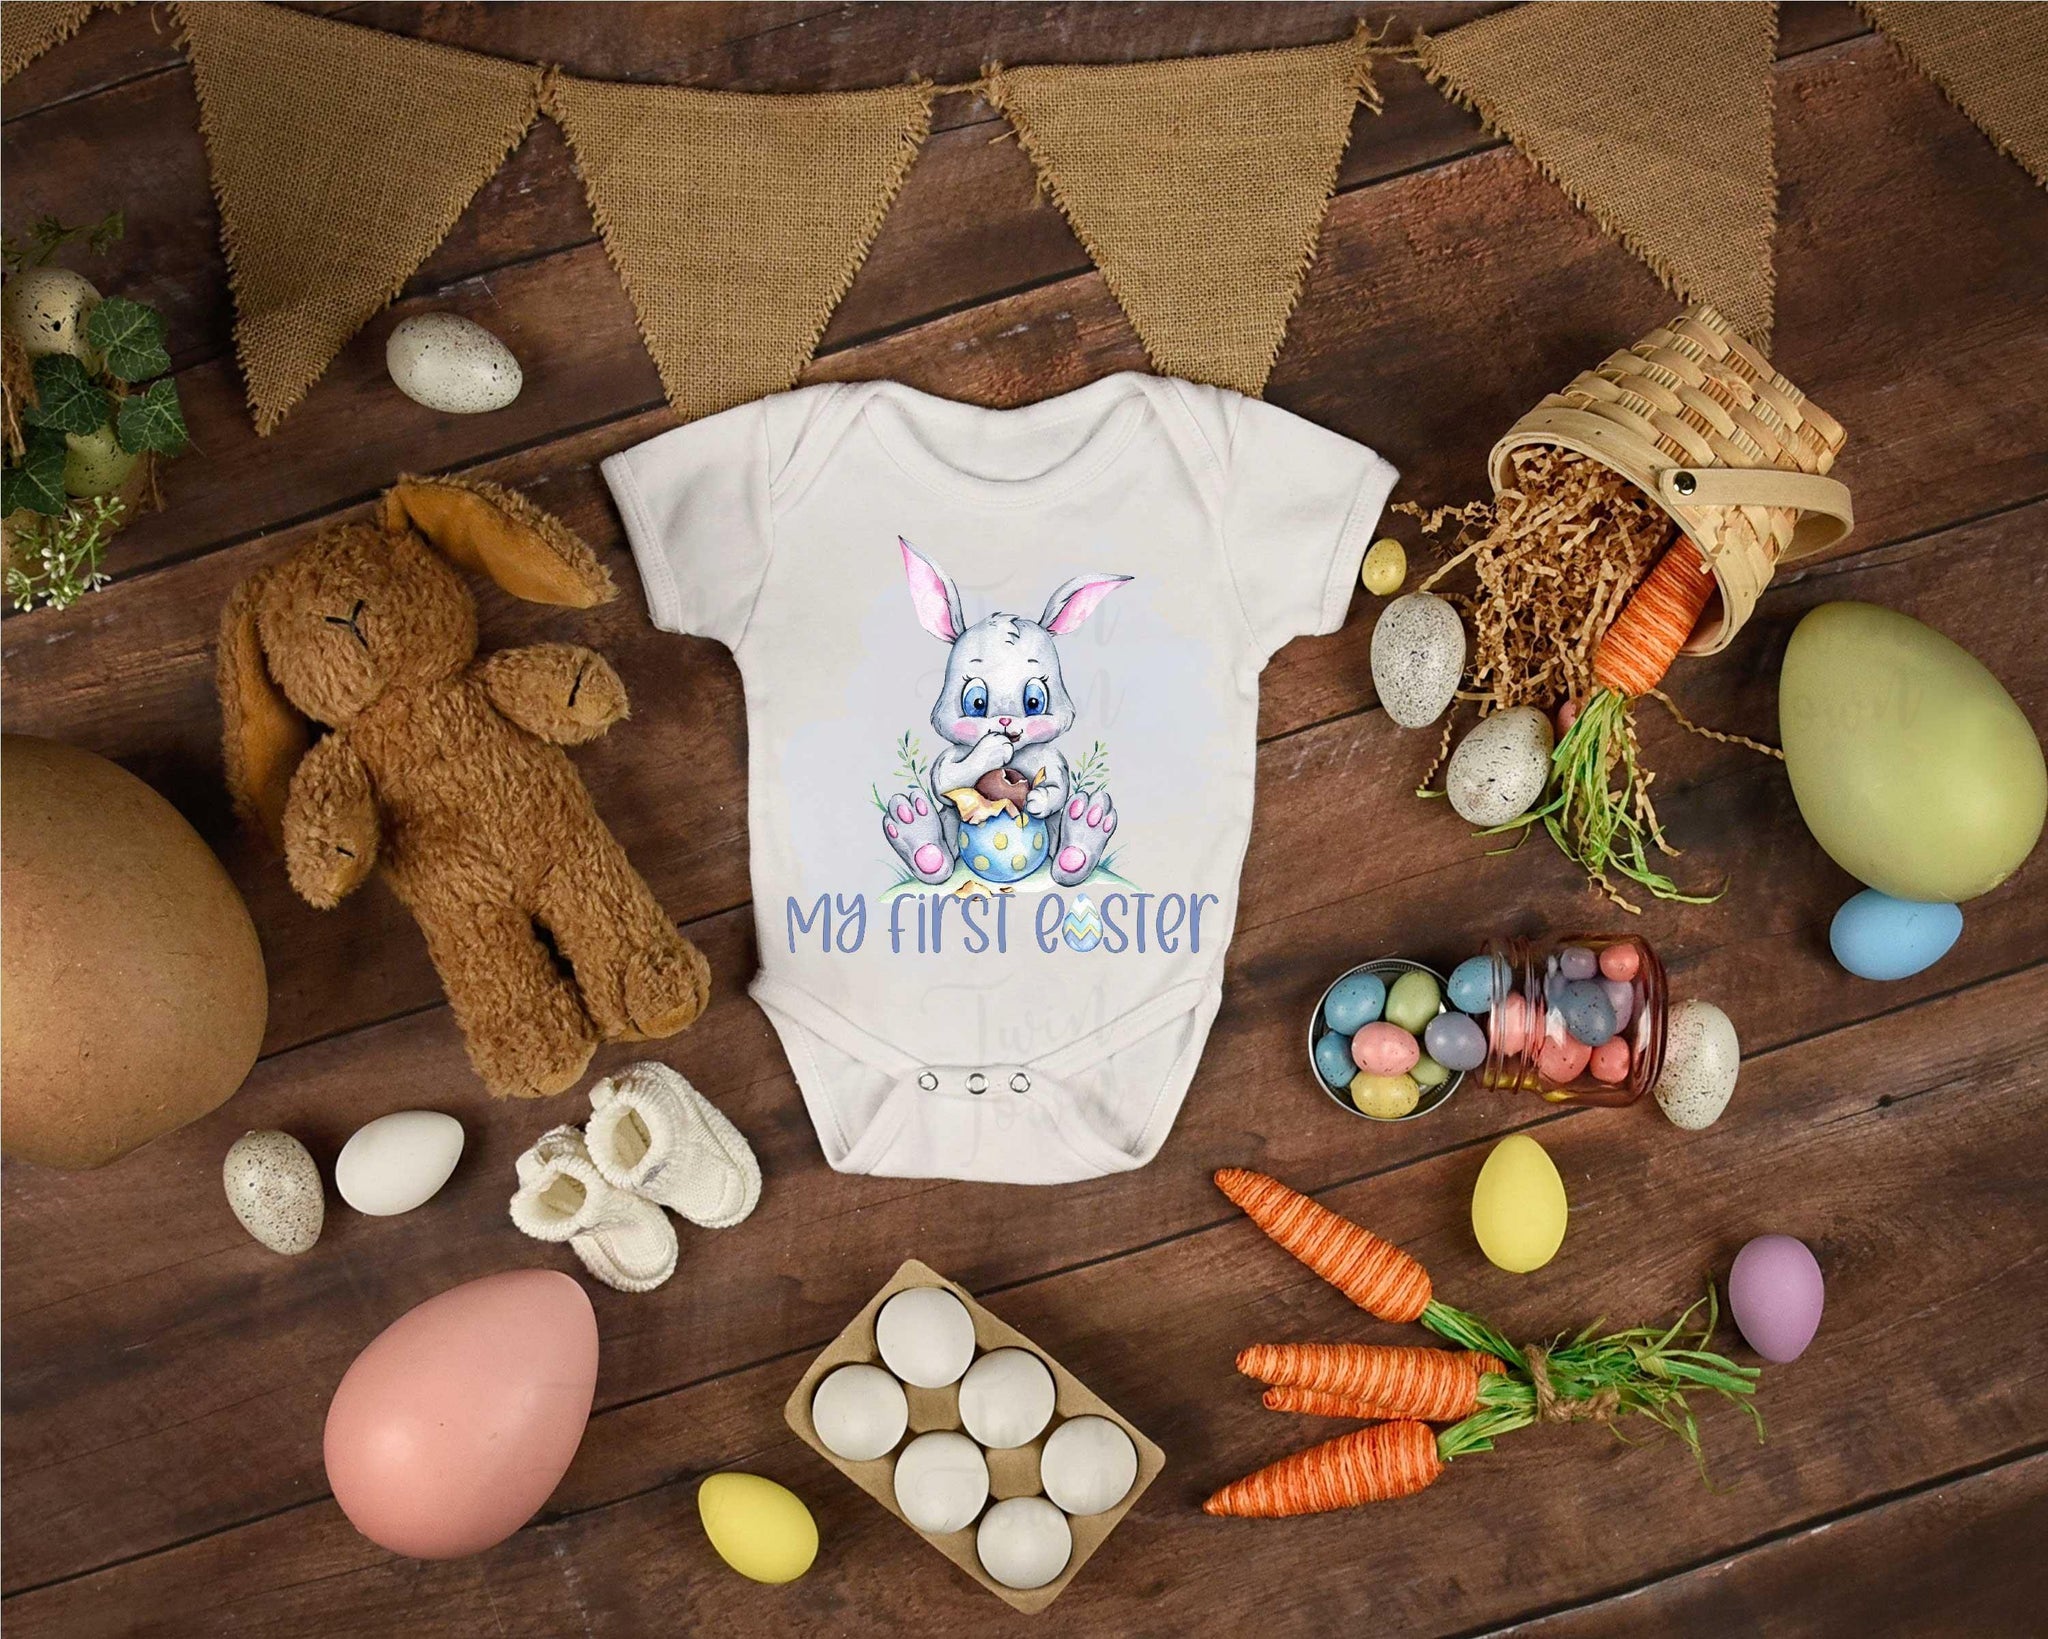 My First easter vest Boy bunny - Twin Town Crafts